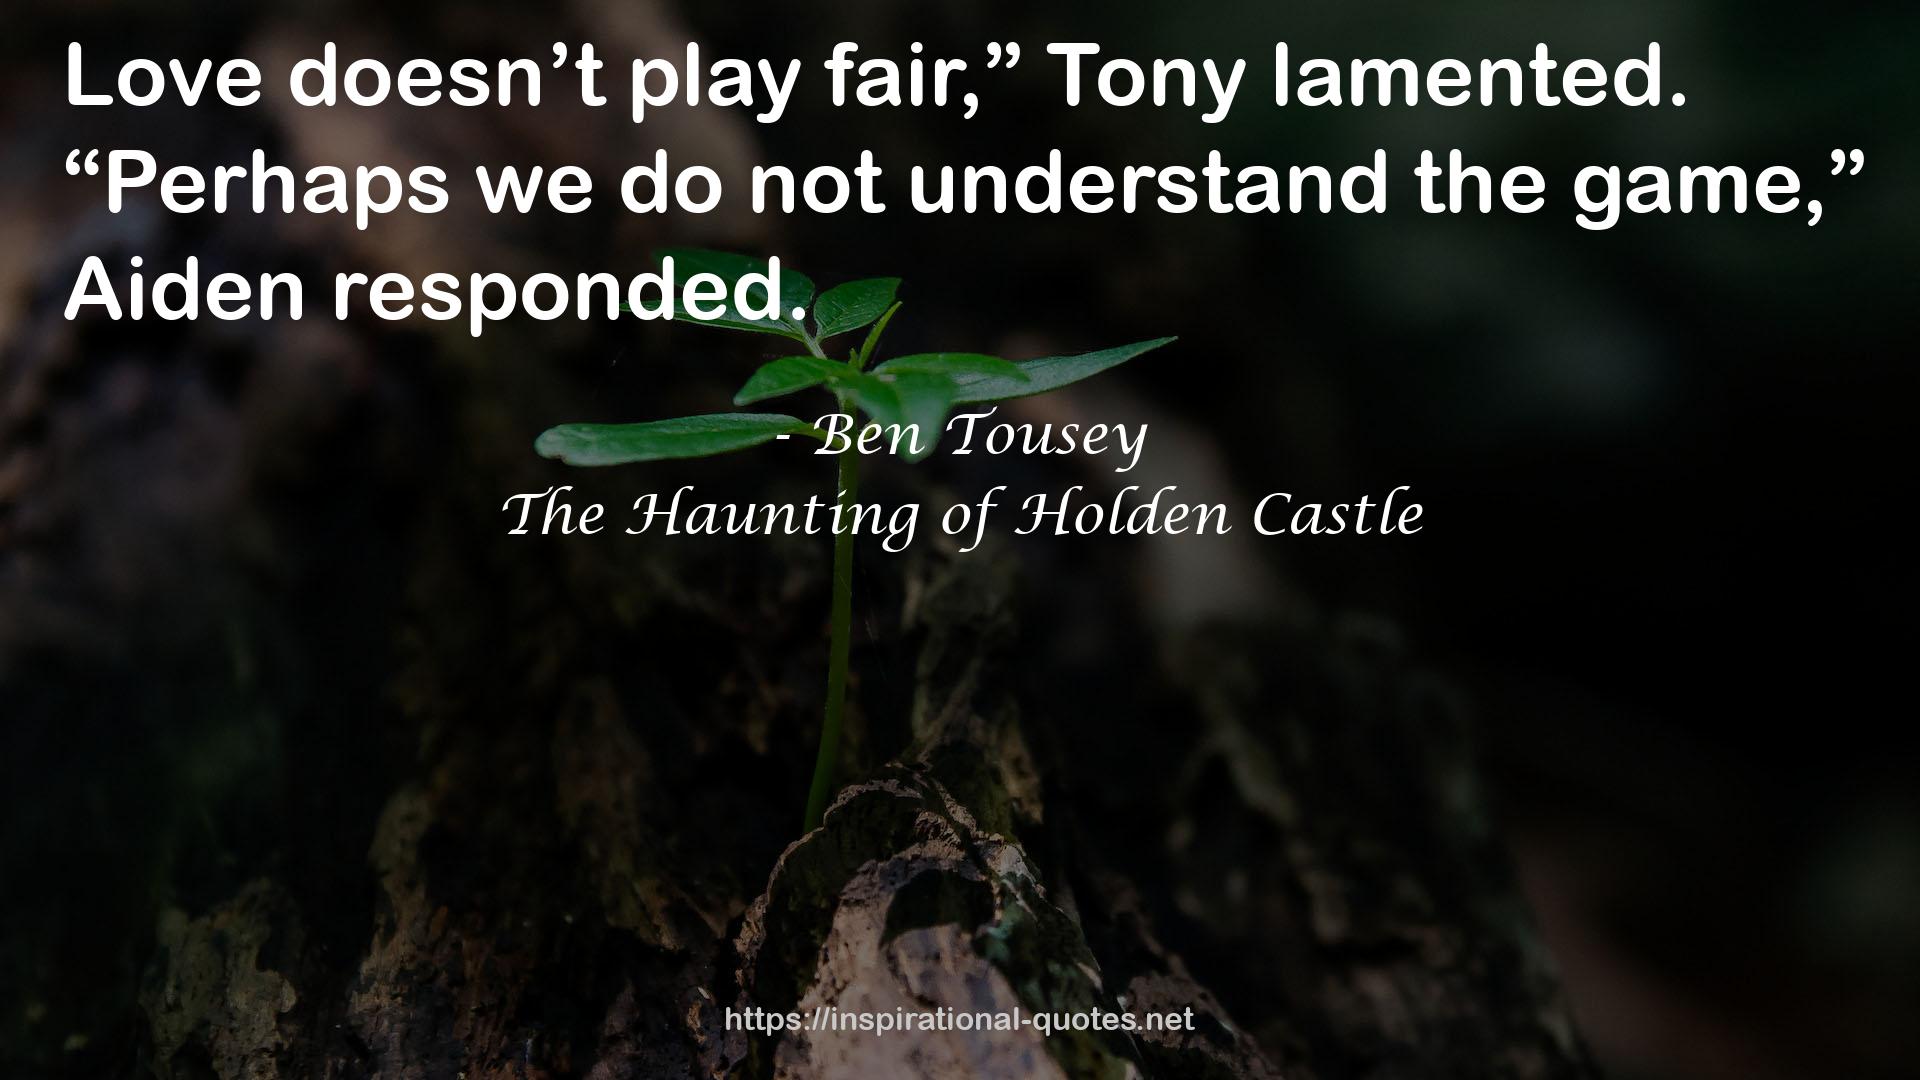 The Haunting of Holden Castle QUOTES